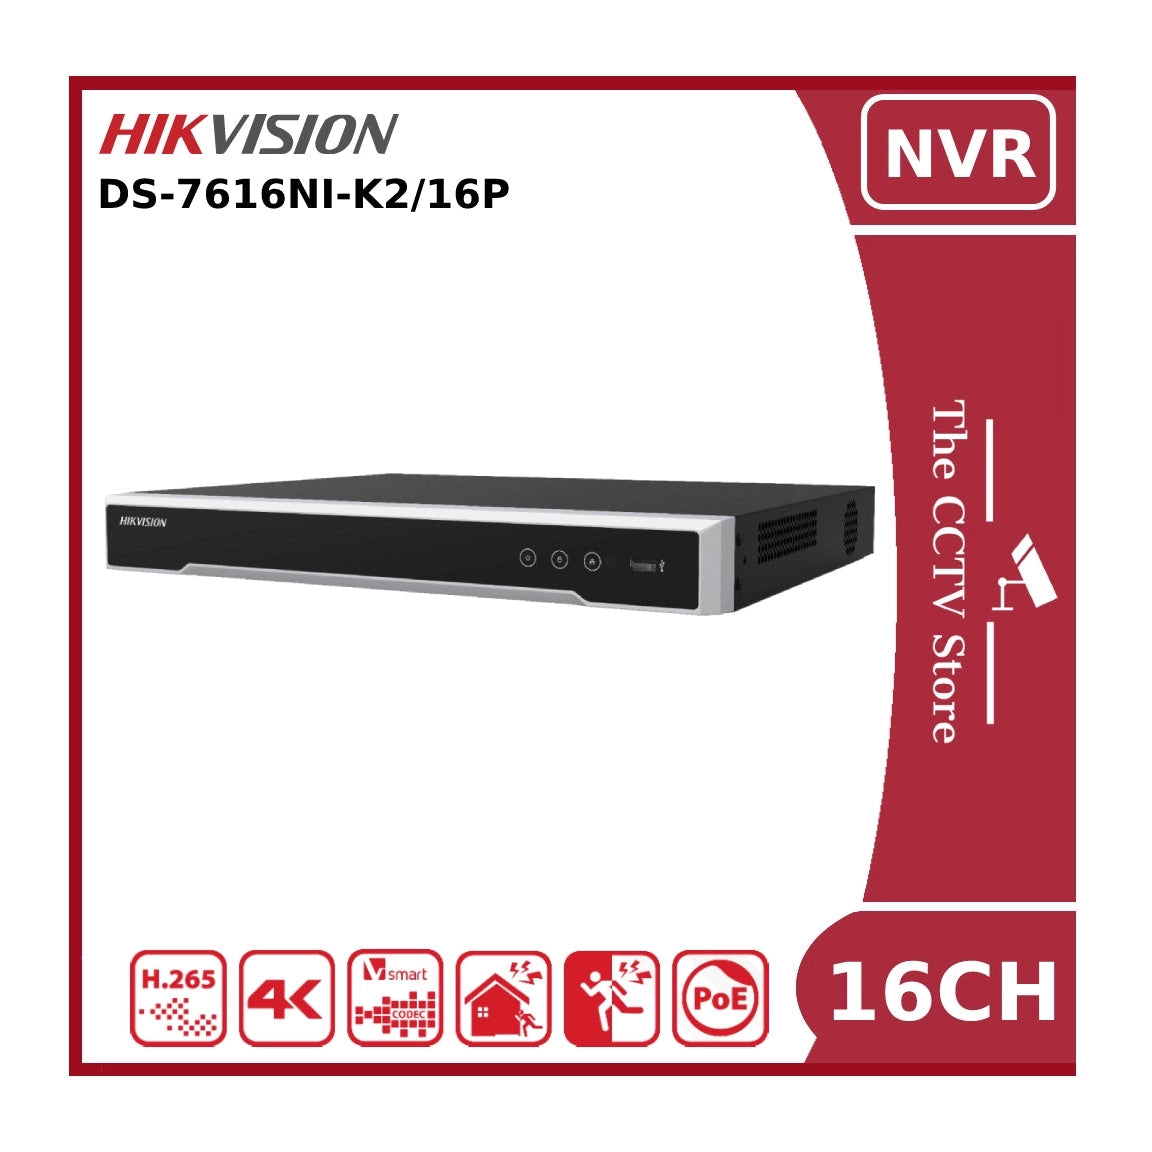 Hikvision DS-7616NI-K2/16P 12MP PoE 16 Channel NVR With 2HDD Bays